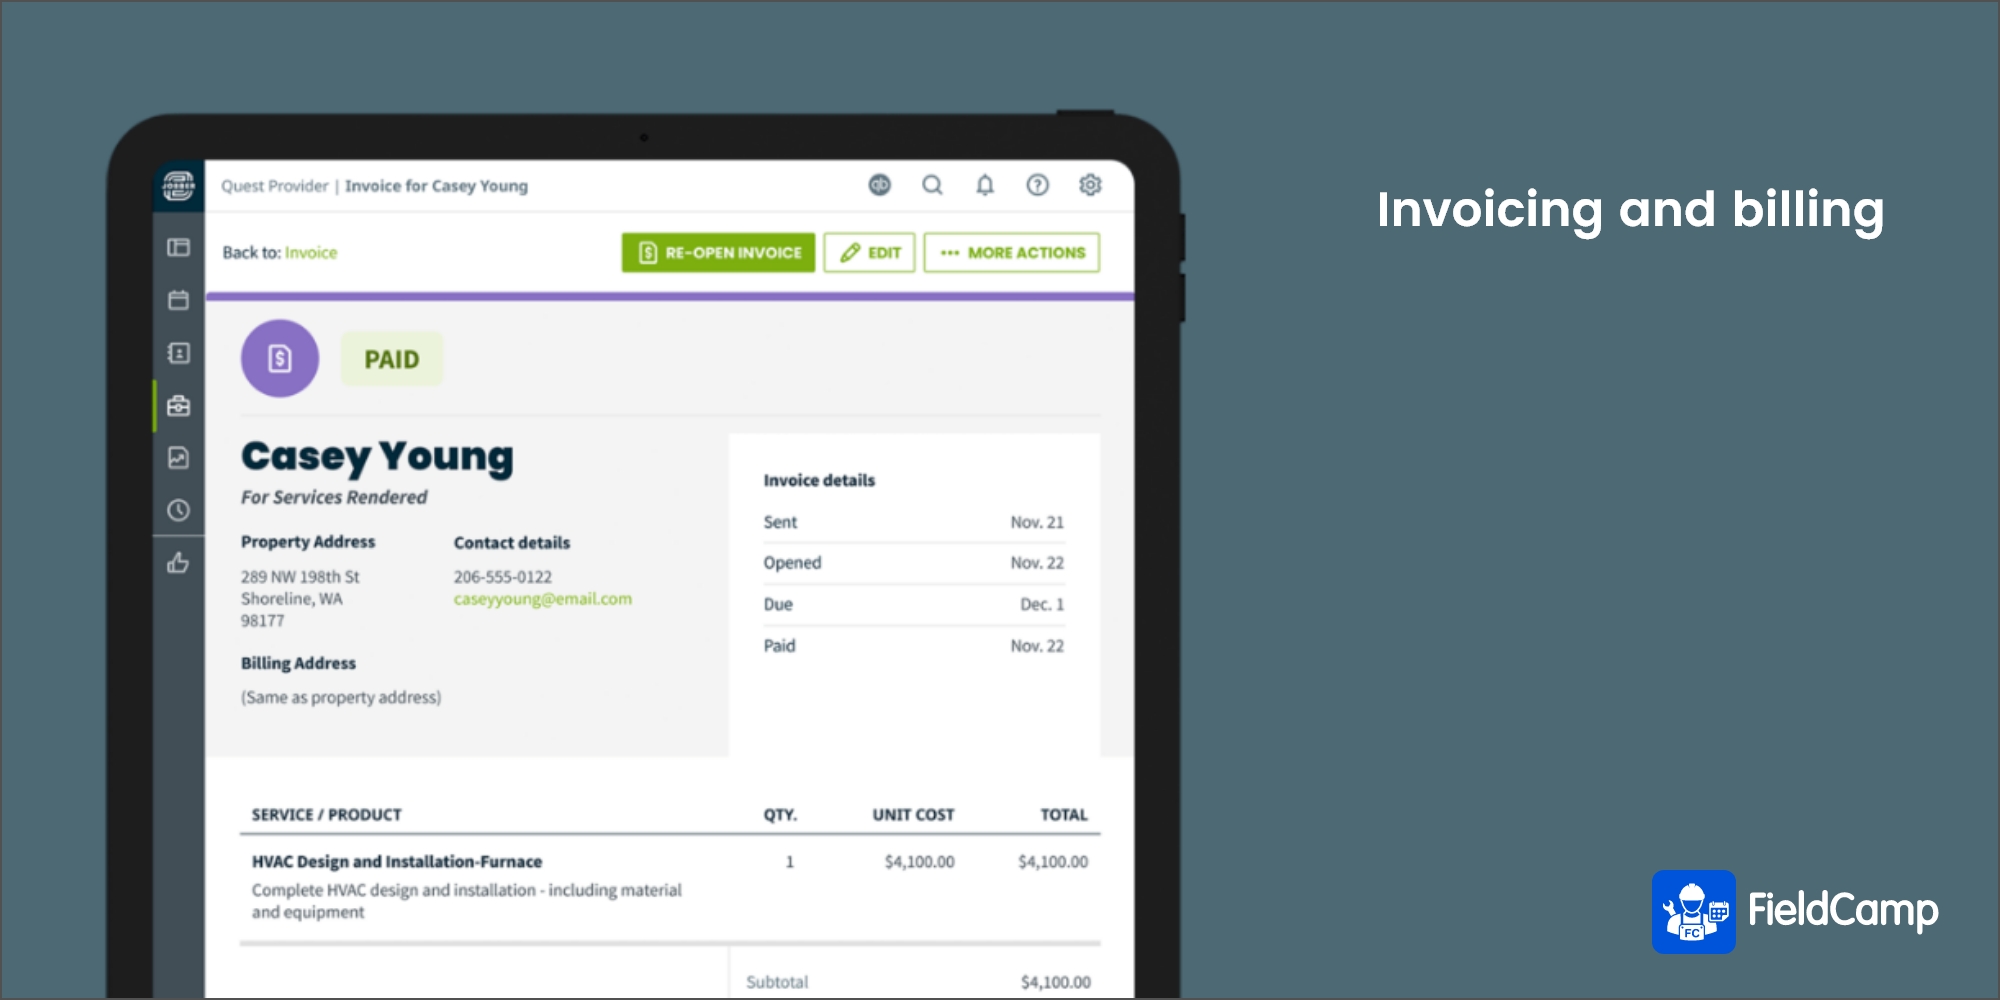 Invoicing and billing